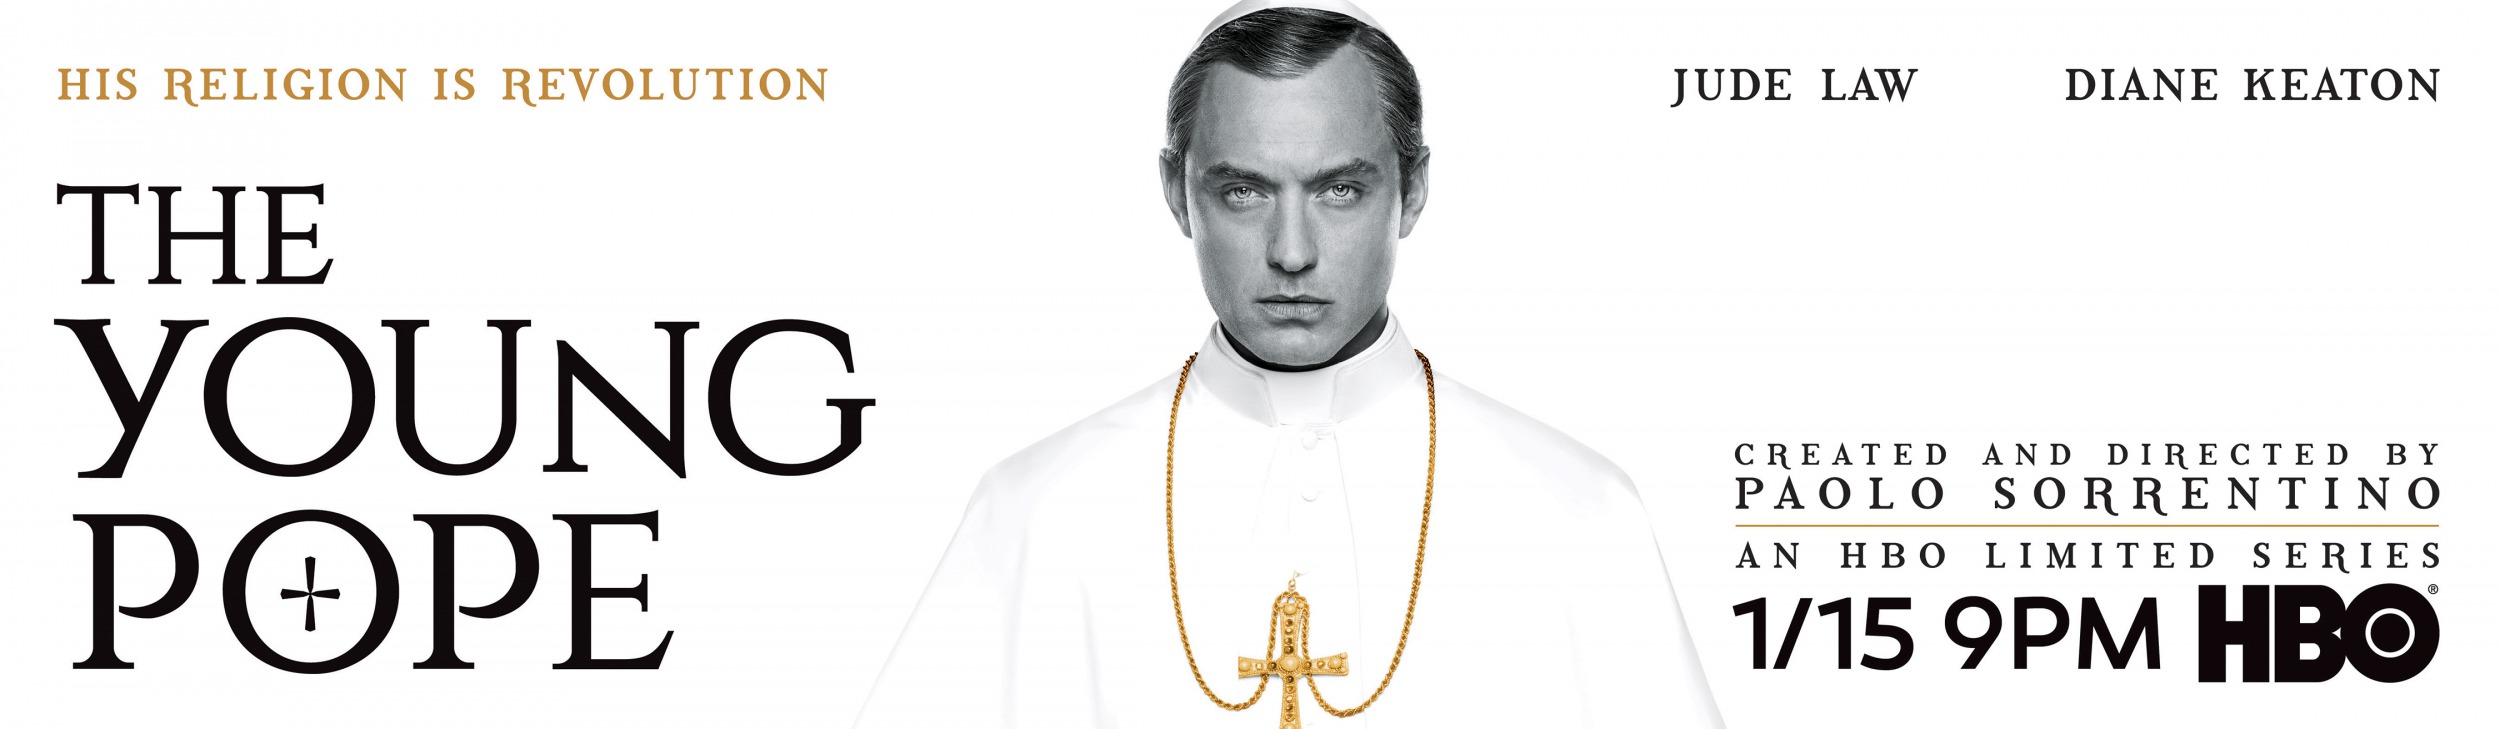 Mega Sized TV Poster Image for The Young Pope (#2 of 2)